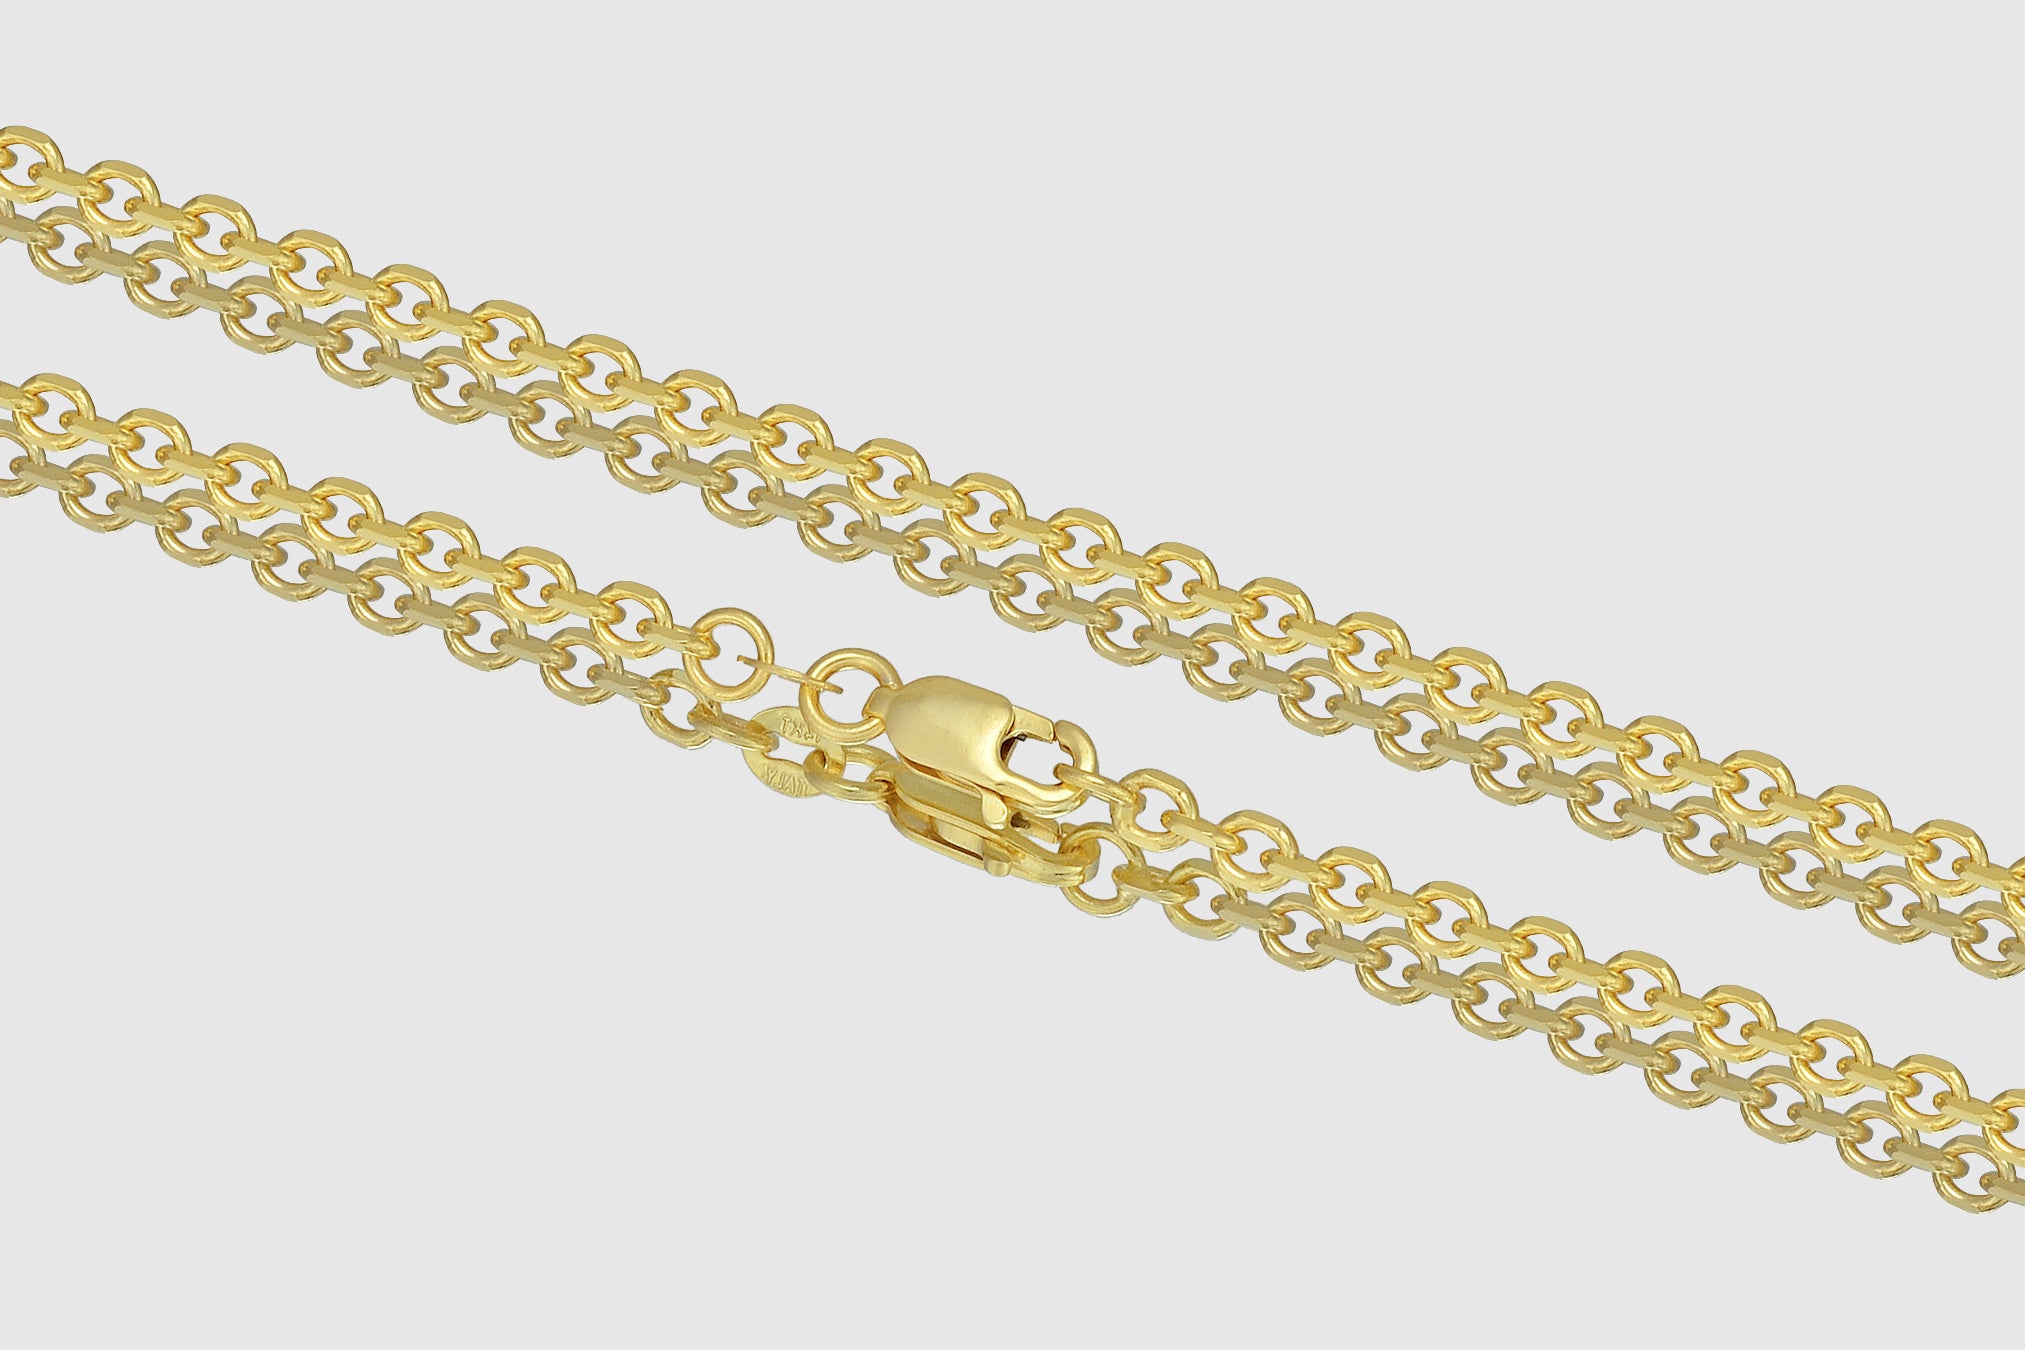 19 x 14mm 14K Solid Yellow Gold Necklace Shortener Clasp with Safety Catch for Pearl or Bead Strand Necklace Made in USA by Craft Wire